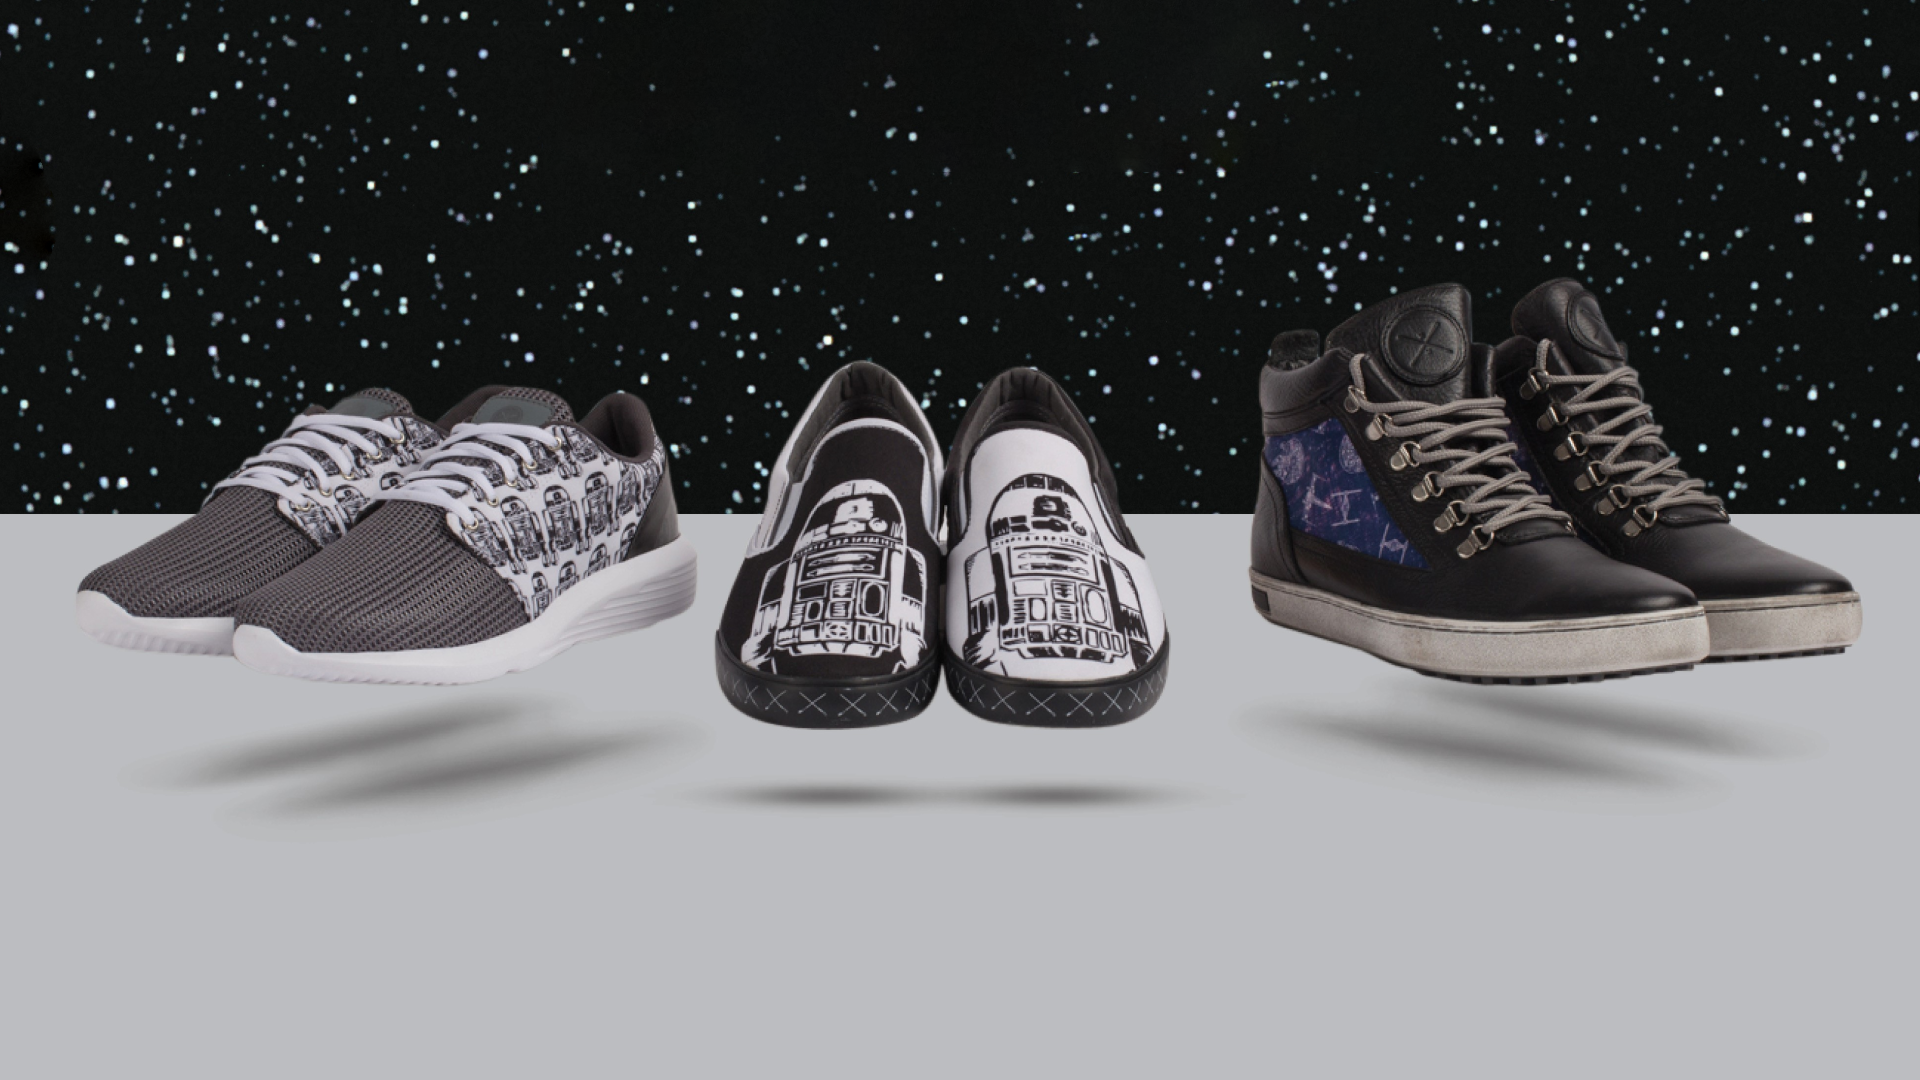 Footwear Company Inkkas Reveals STAR WARS-Themed Boots and Shoes ...